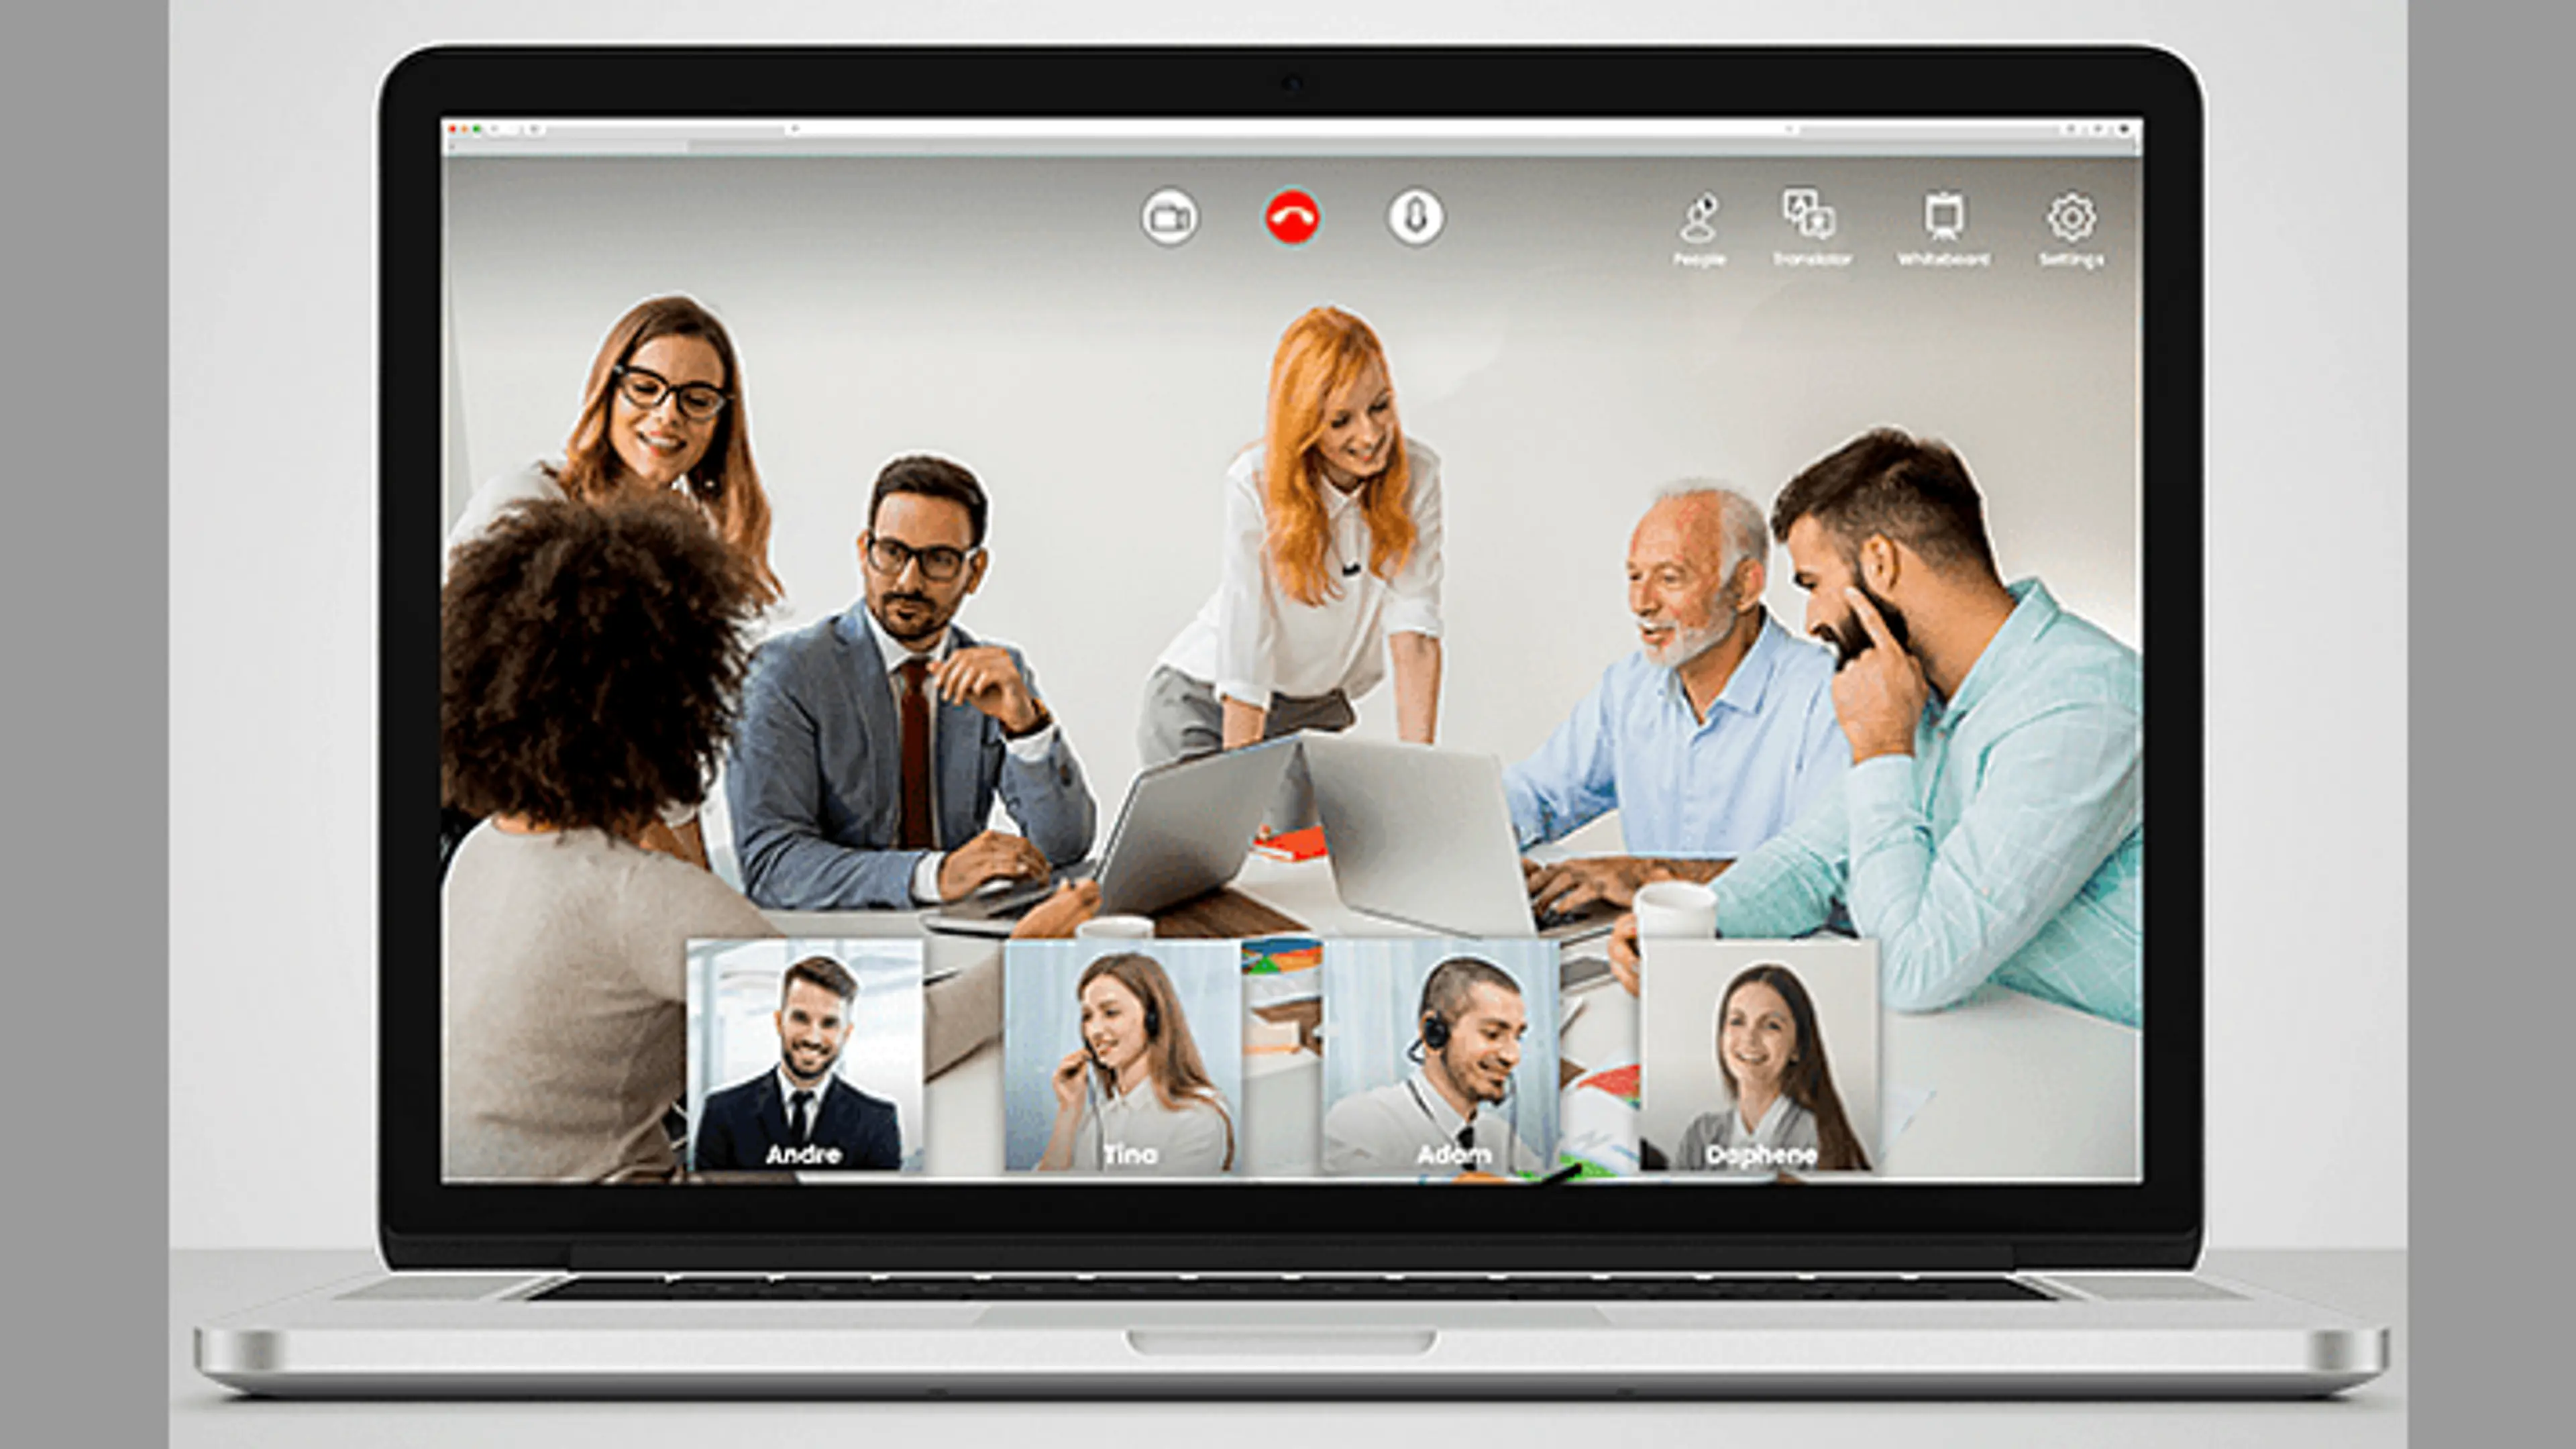 Google Meet, GoToMeeting, and other Zoom alternatives in video conferencing apps